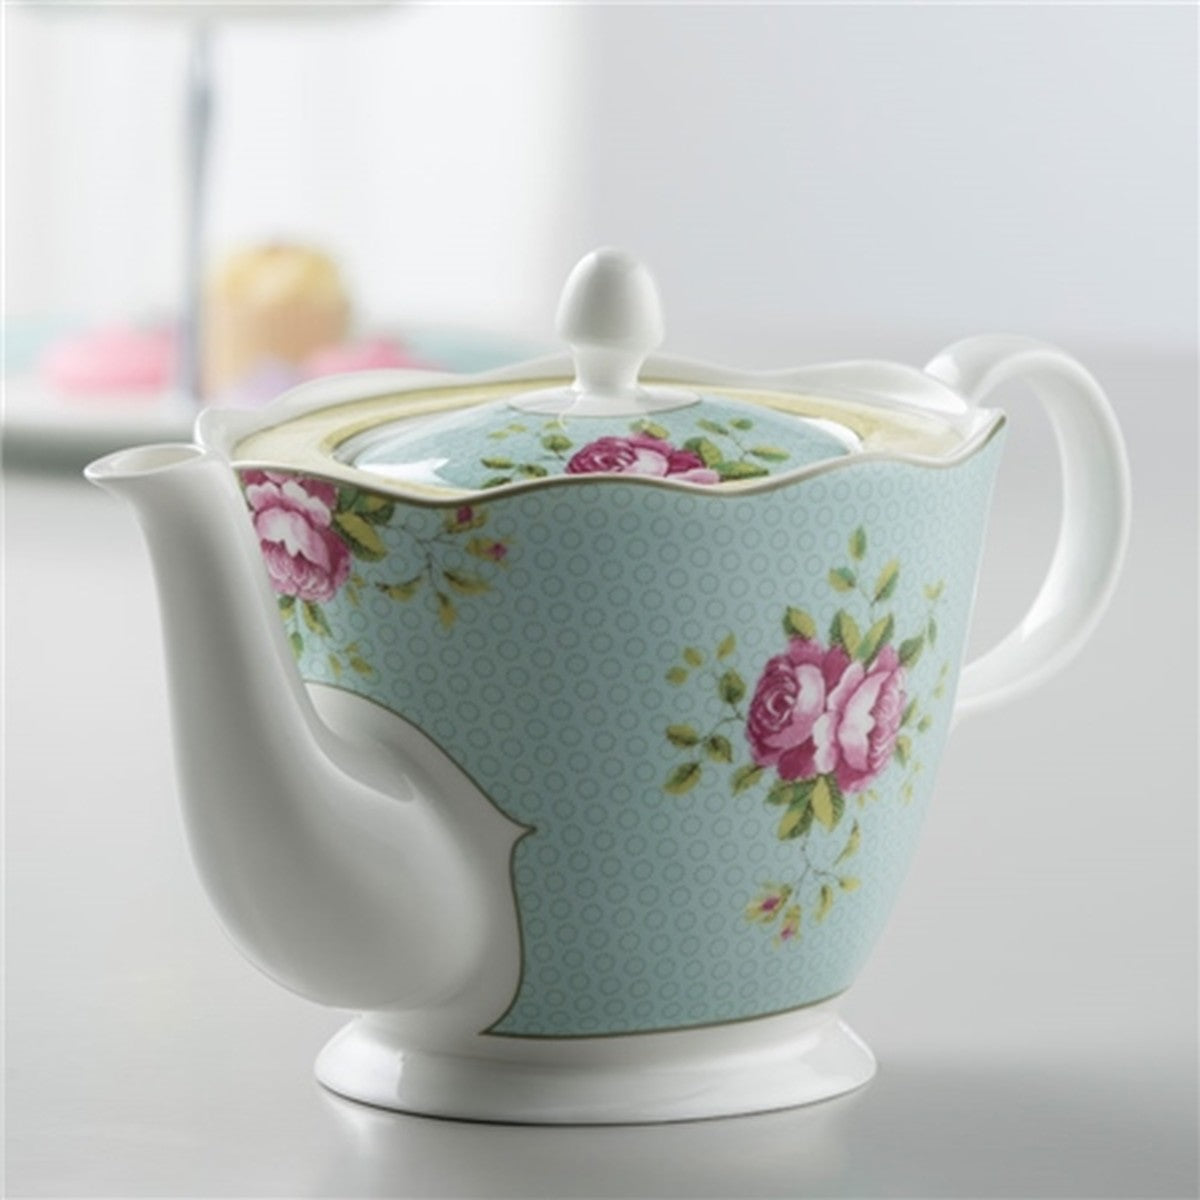 Aynsley Archive Rose Teapot, White, China